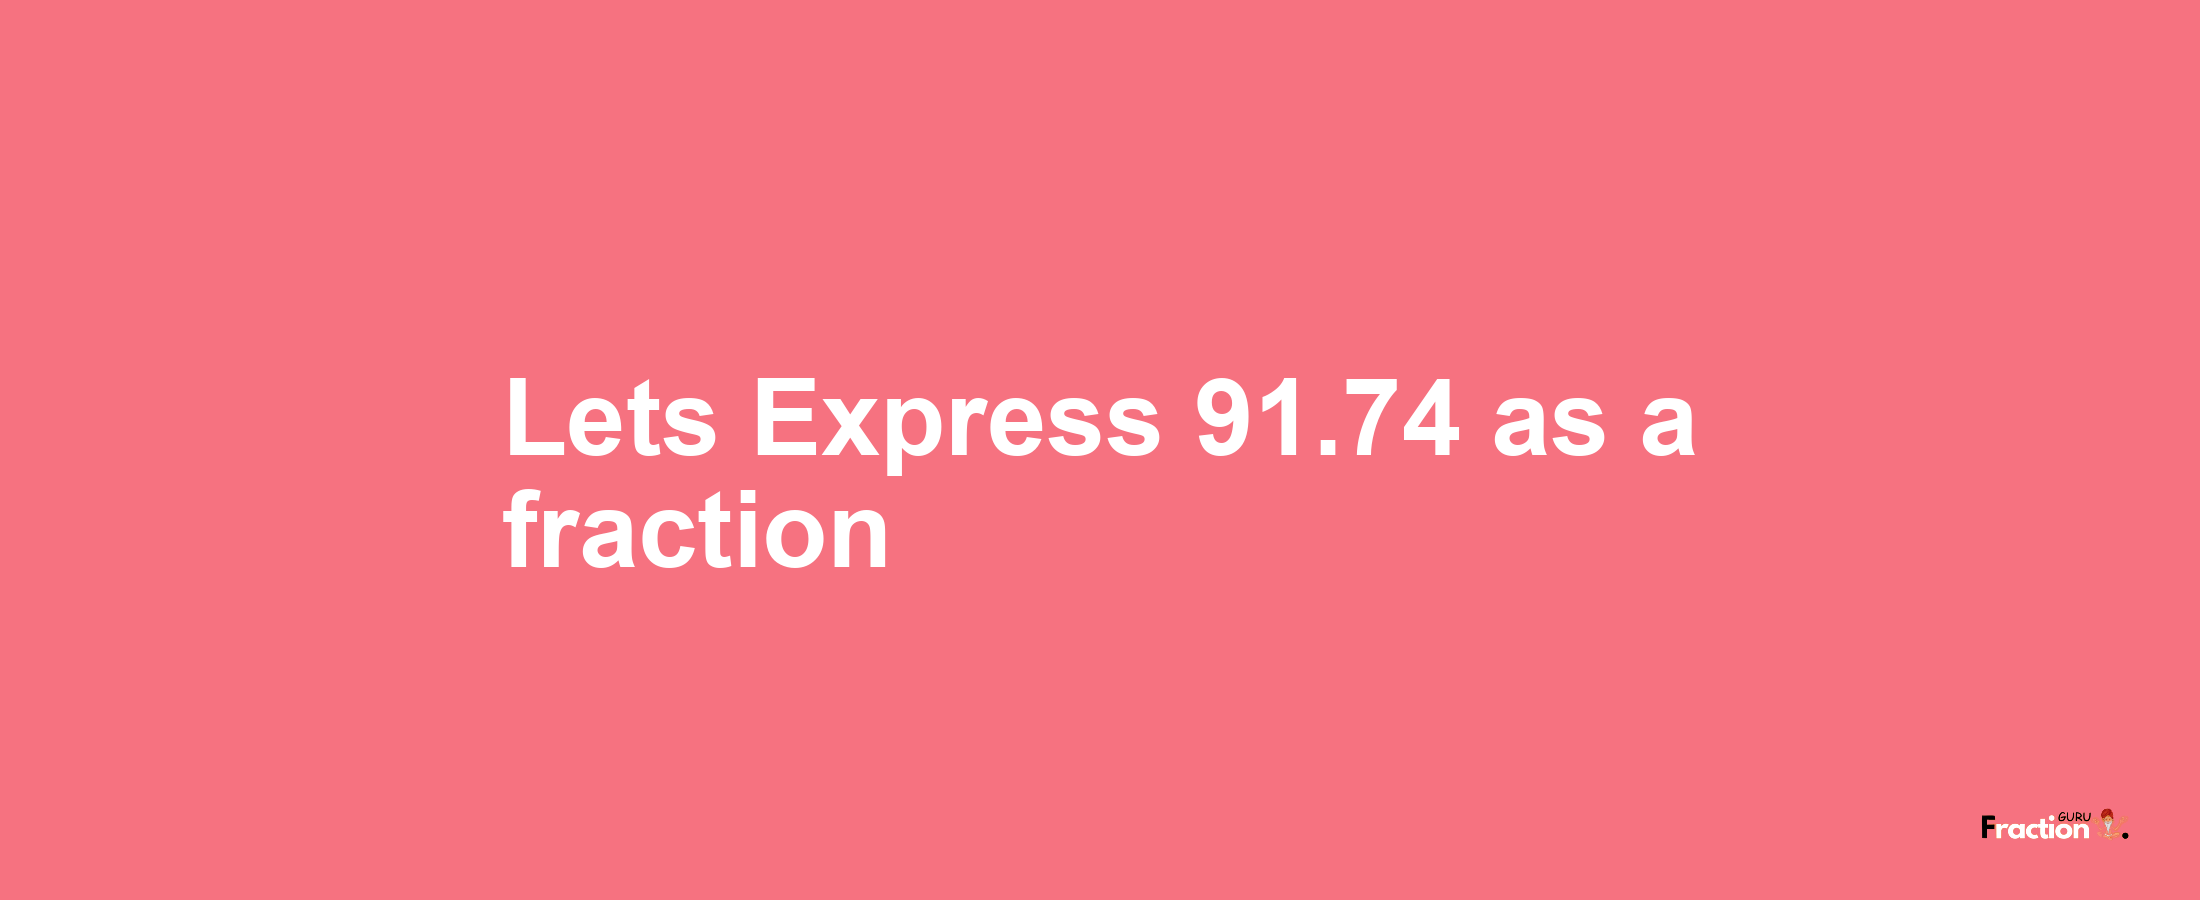 Lets Express 91.74 as afraction